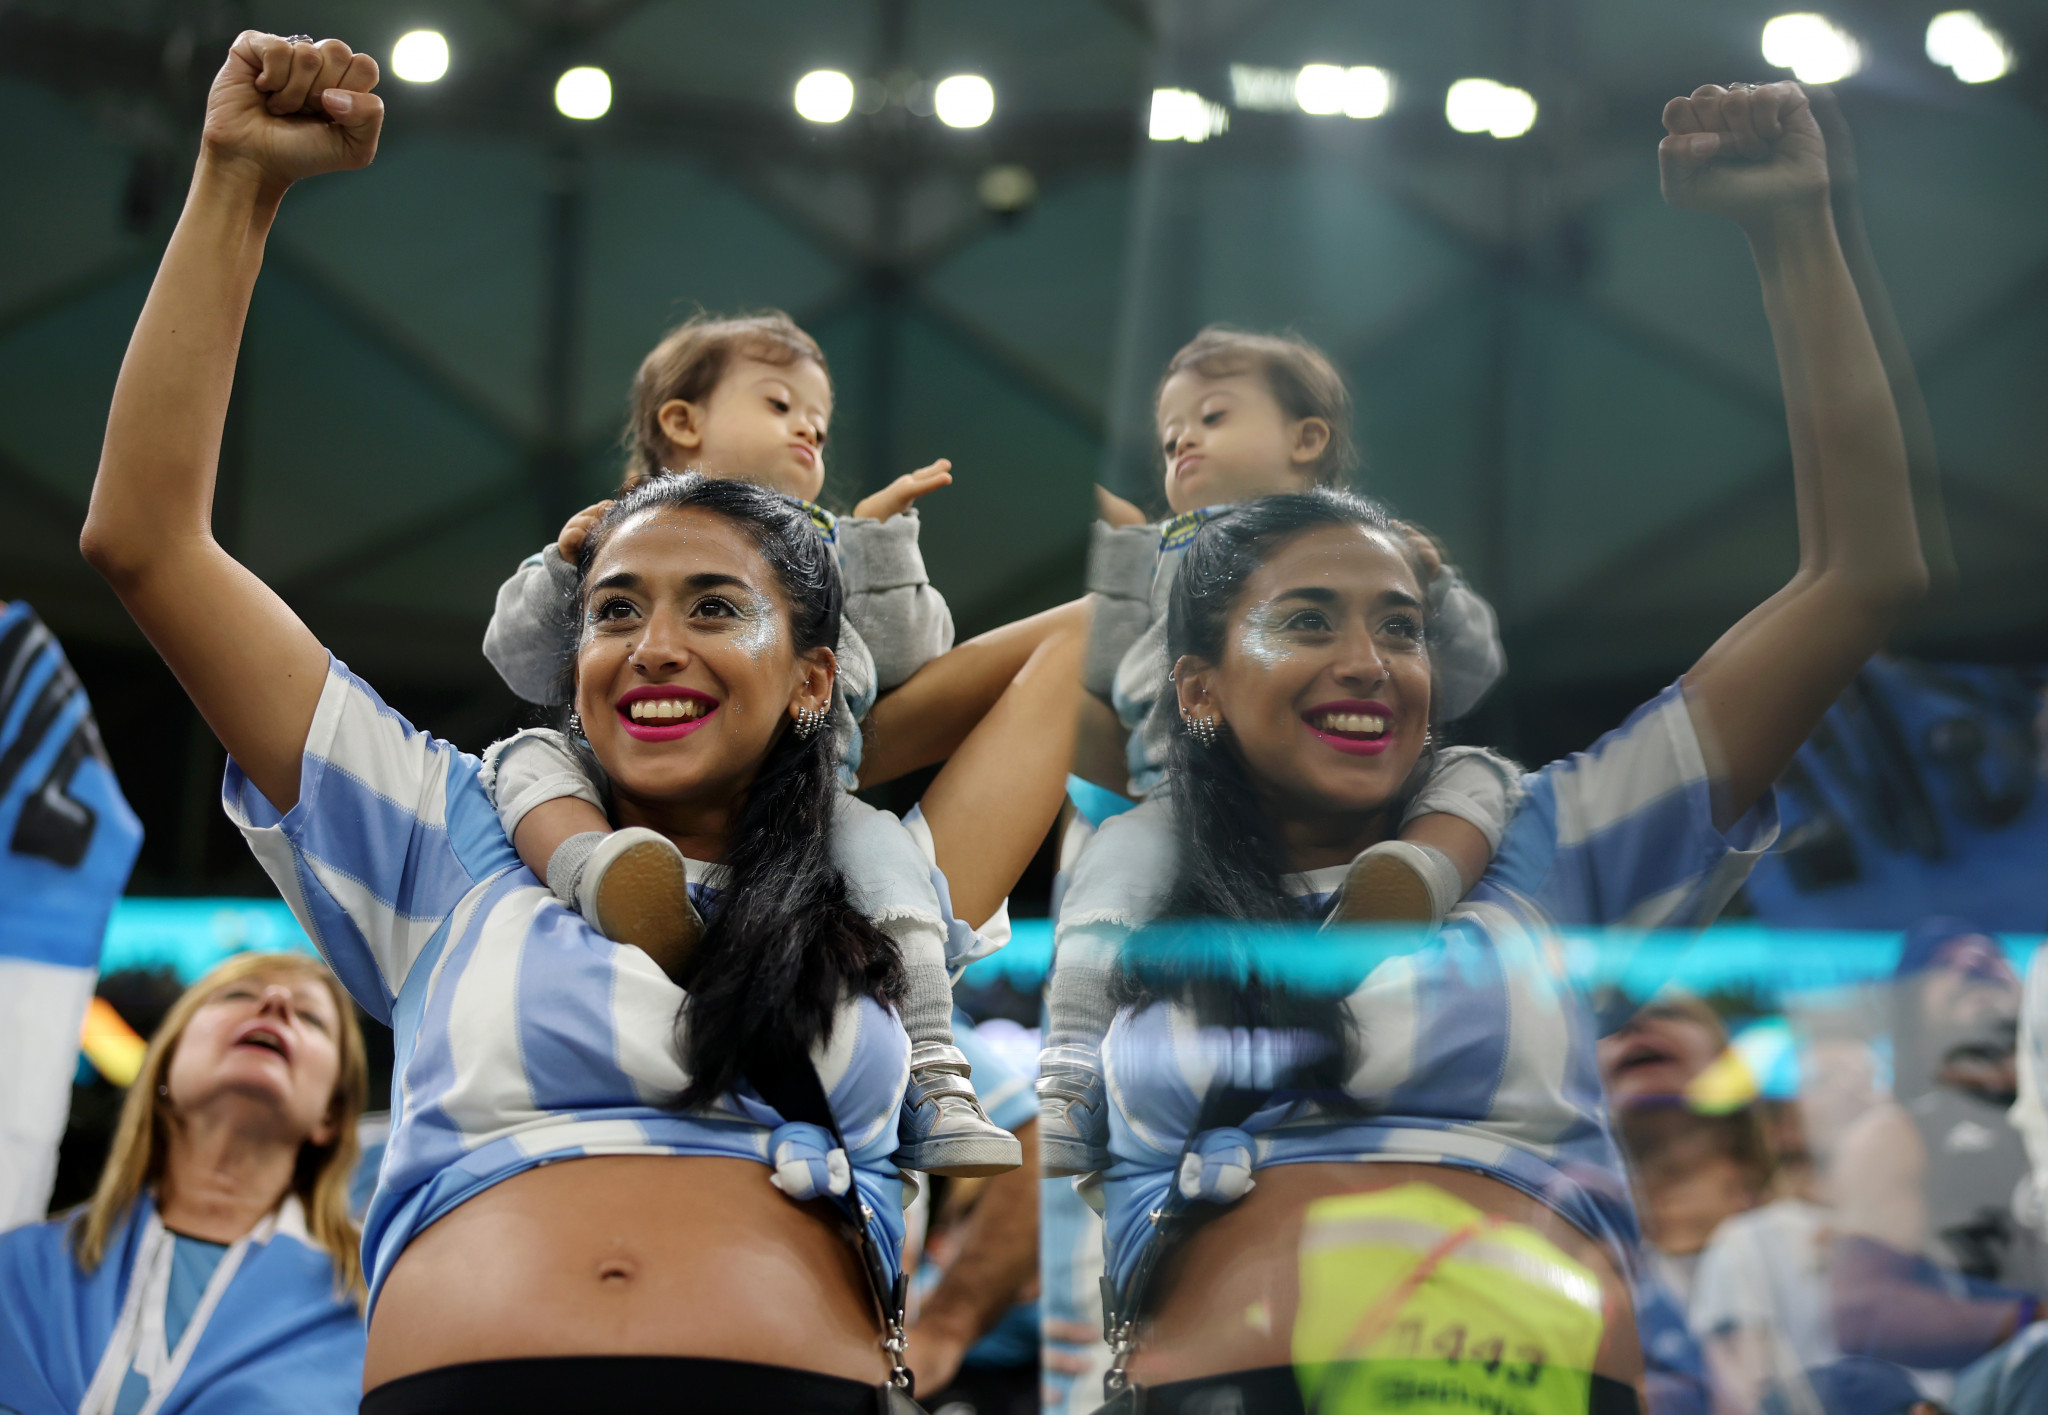 An Argentina fan raises an arm in celebration following her side's comfortable win ©Getty Images